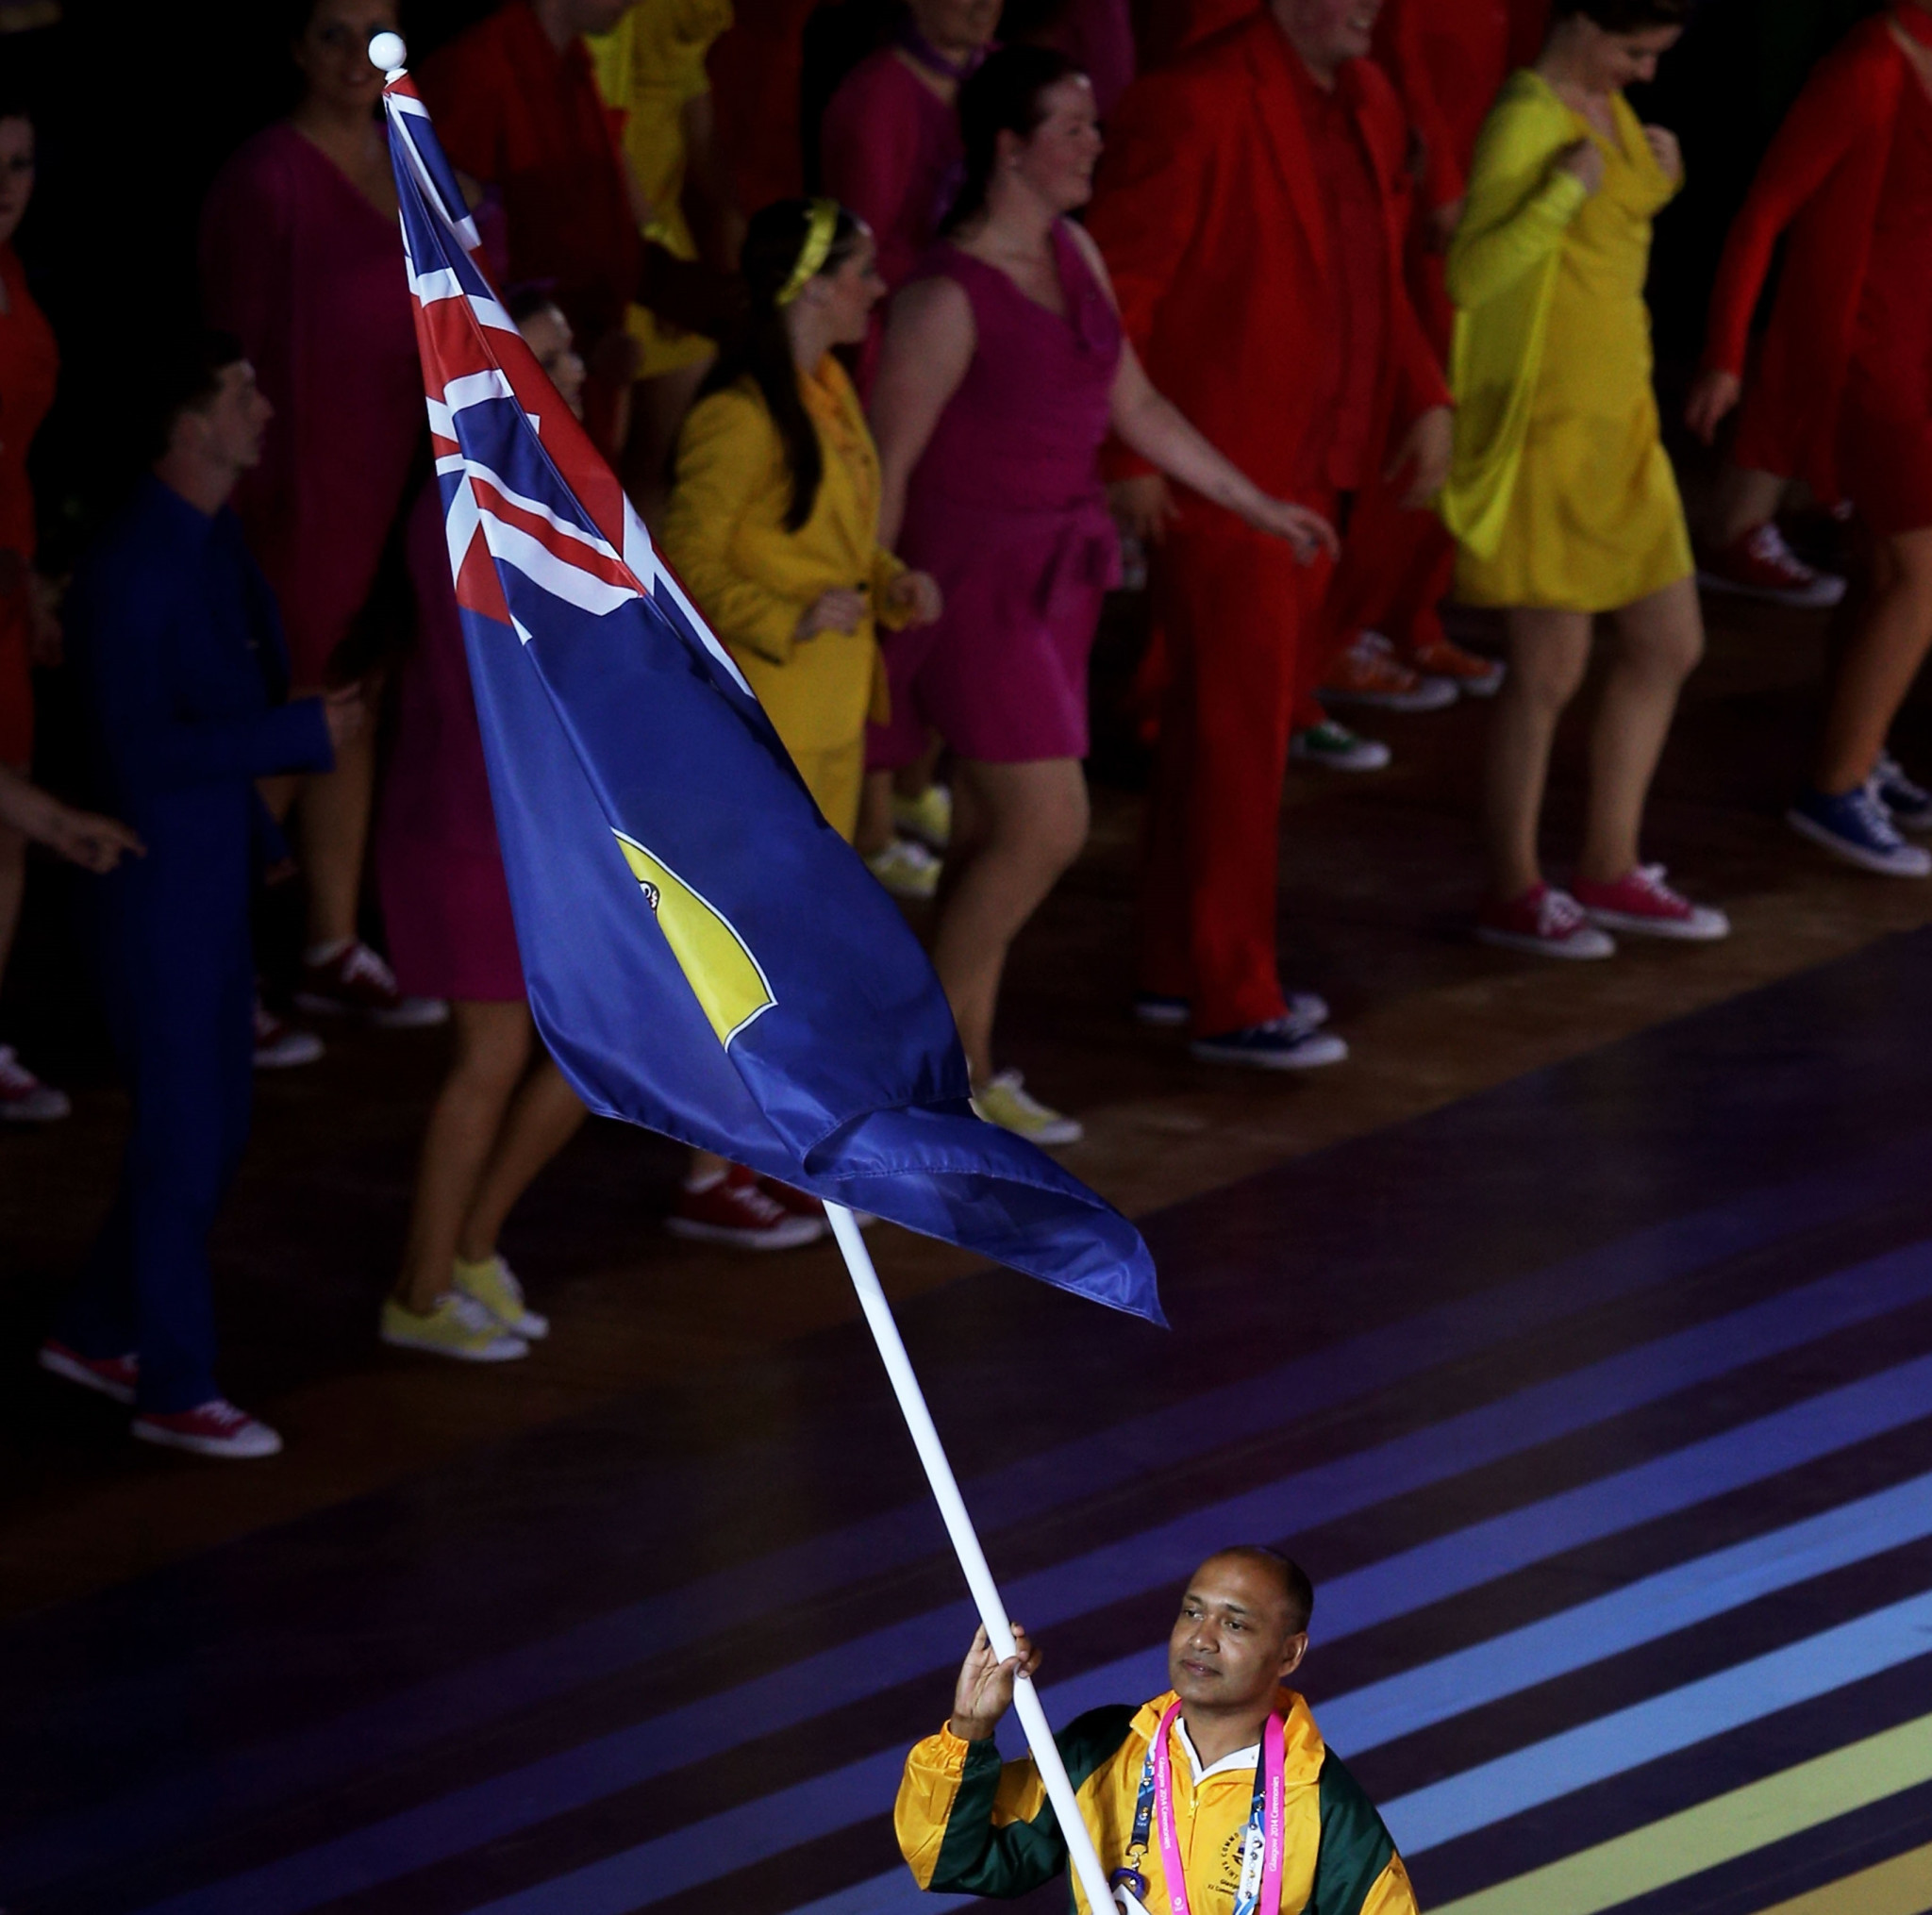 Shooter Simon Henry carries the St Helena flag at the Glasgow 2014 Commonwealth Games ©Getty Images